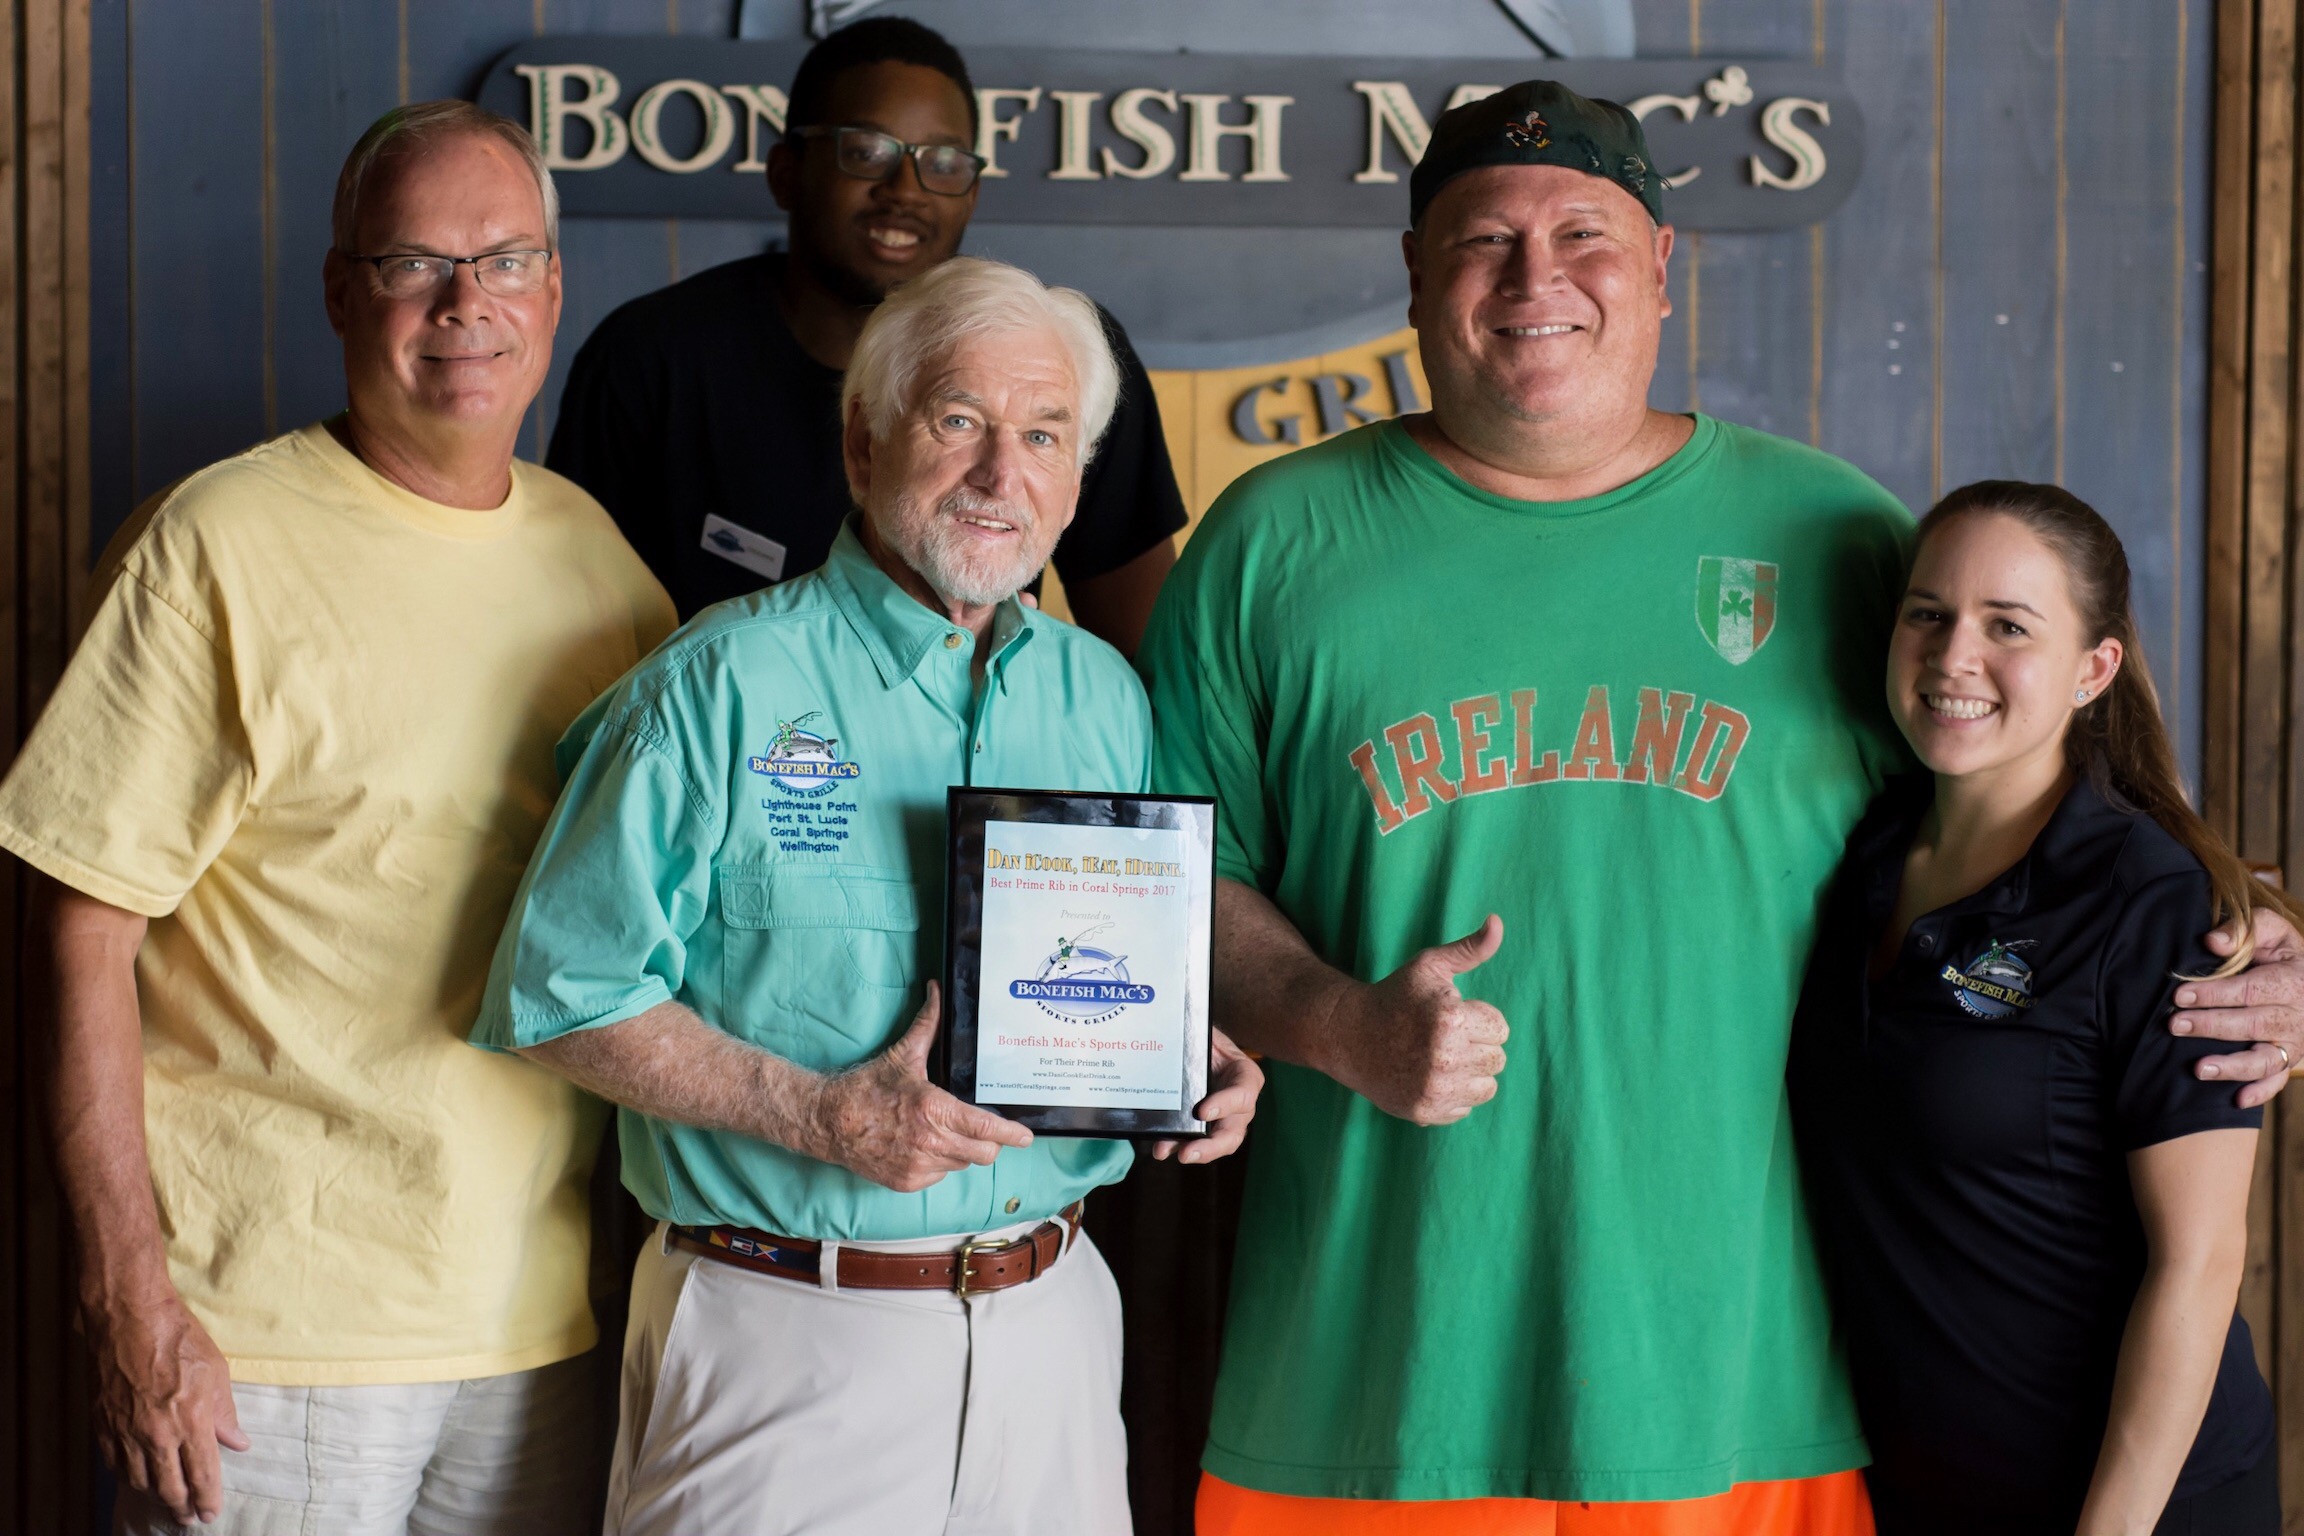 Owner Chuck with his award: L to Right: John President of Taste of Coral Springs, Dishane, the Talent, Geri